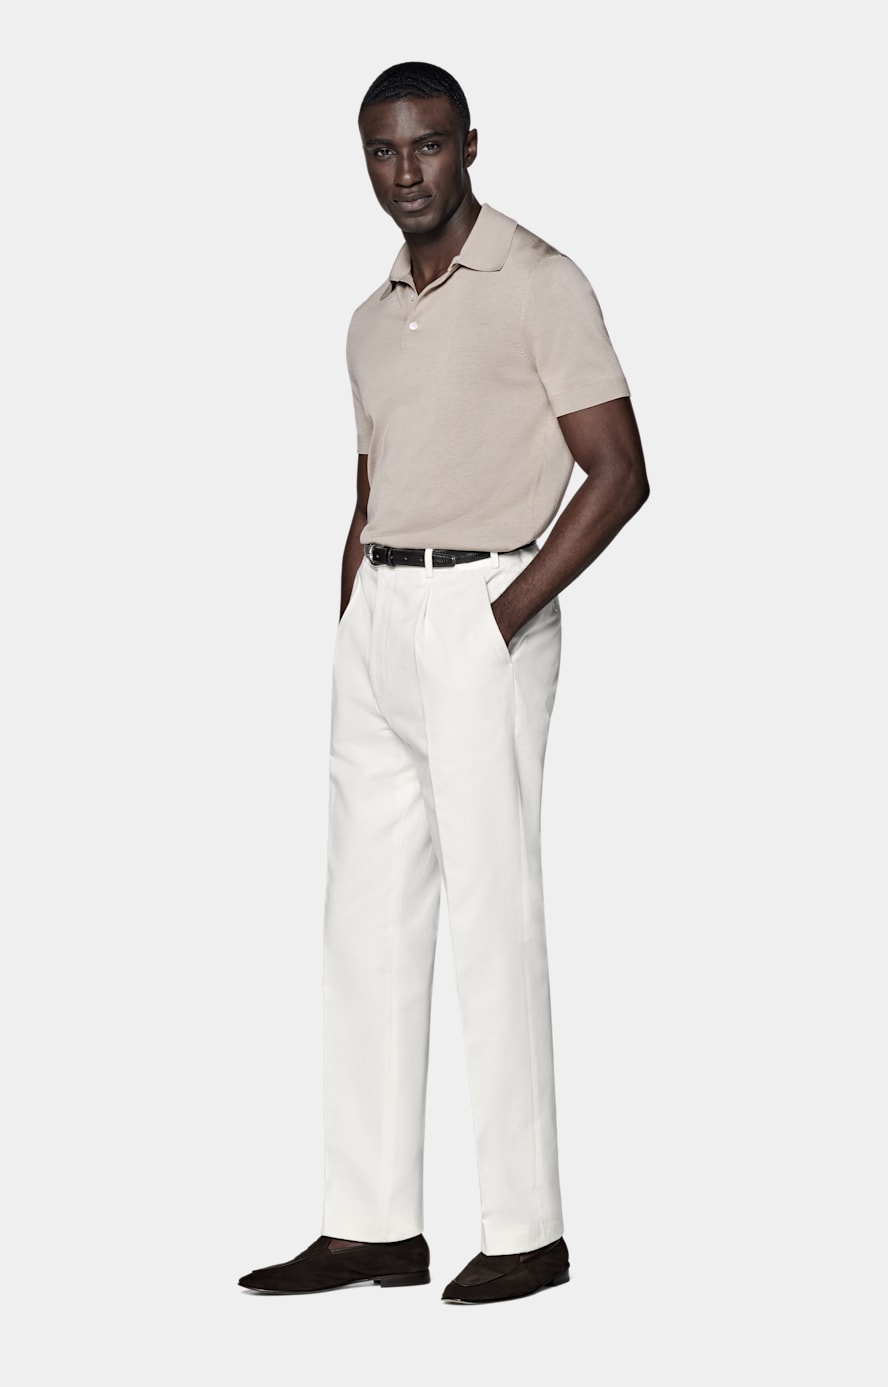 Firenze Hose off-white wide Leg tapered